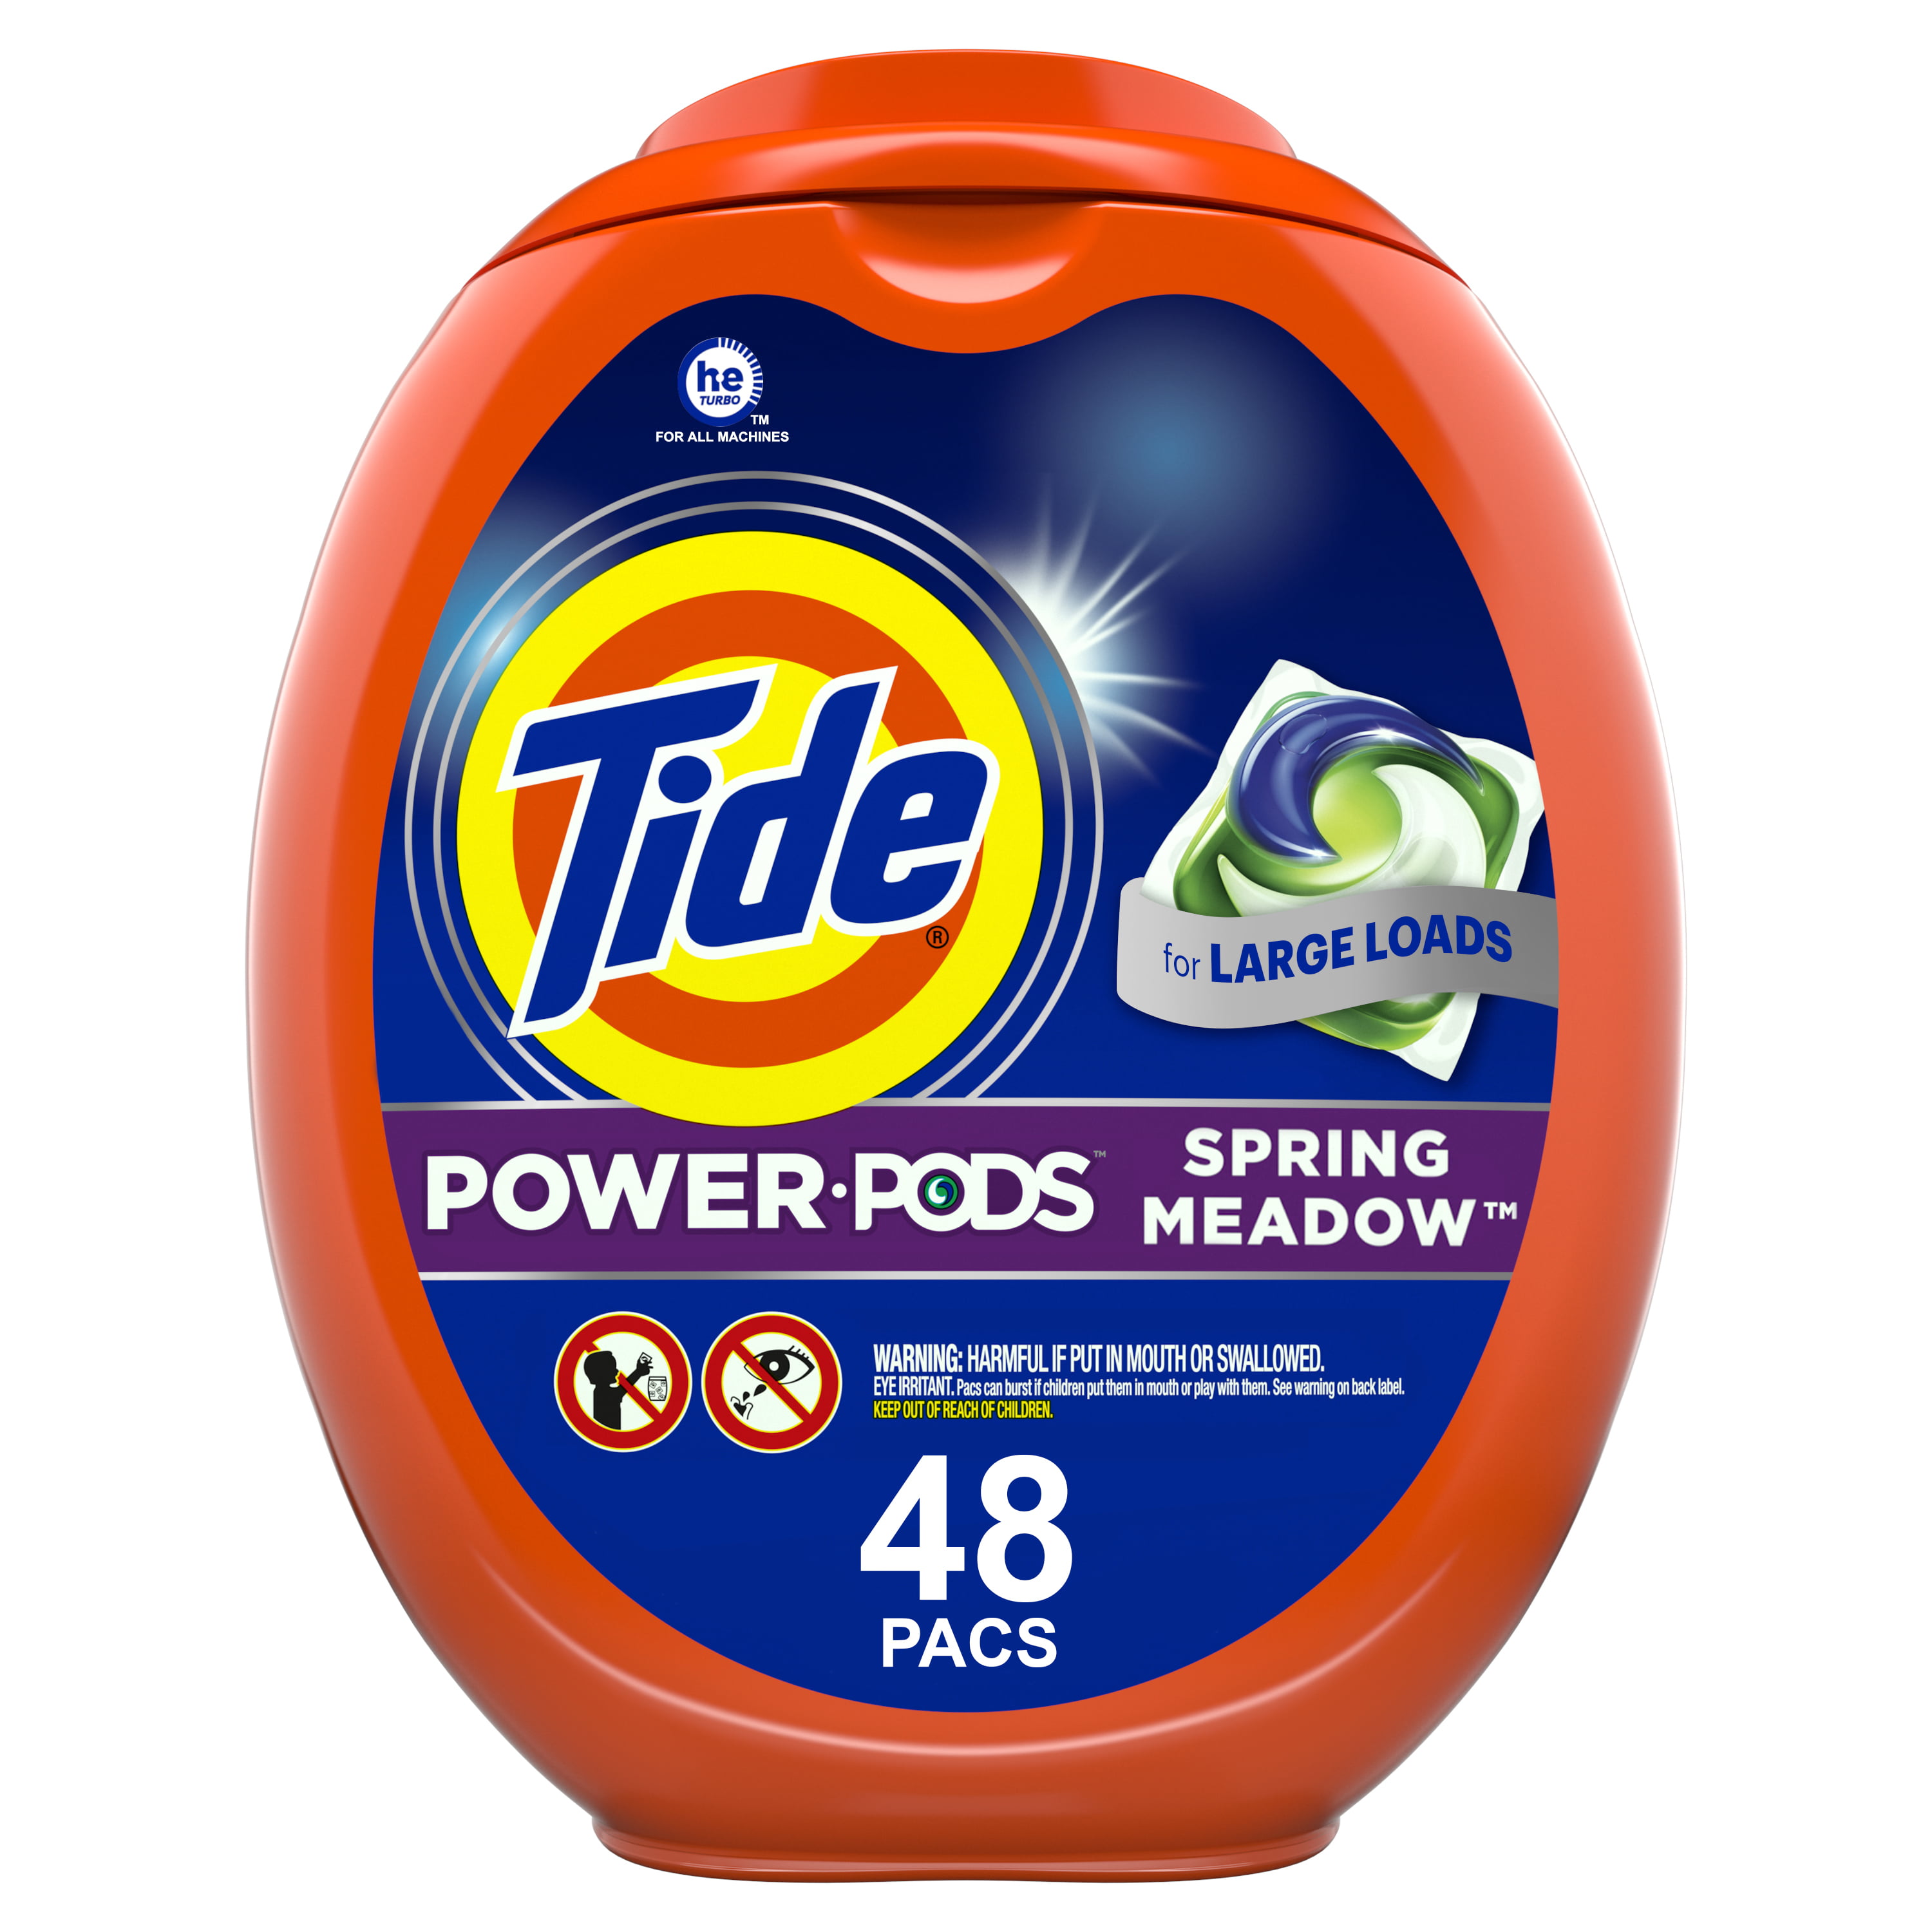 Tide Hygienic Clean Heavy 10x Duty Power PODS Spring Meadow Laundry Detergent Liquid Pacs - 48ct